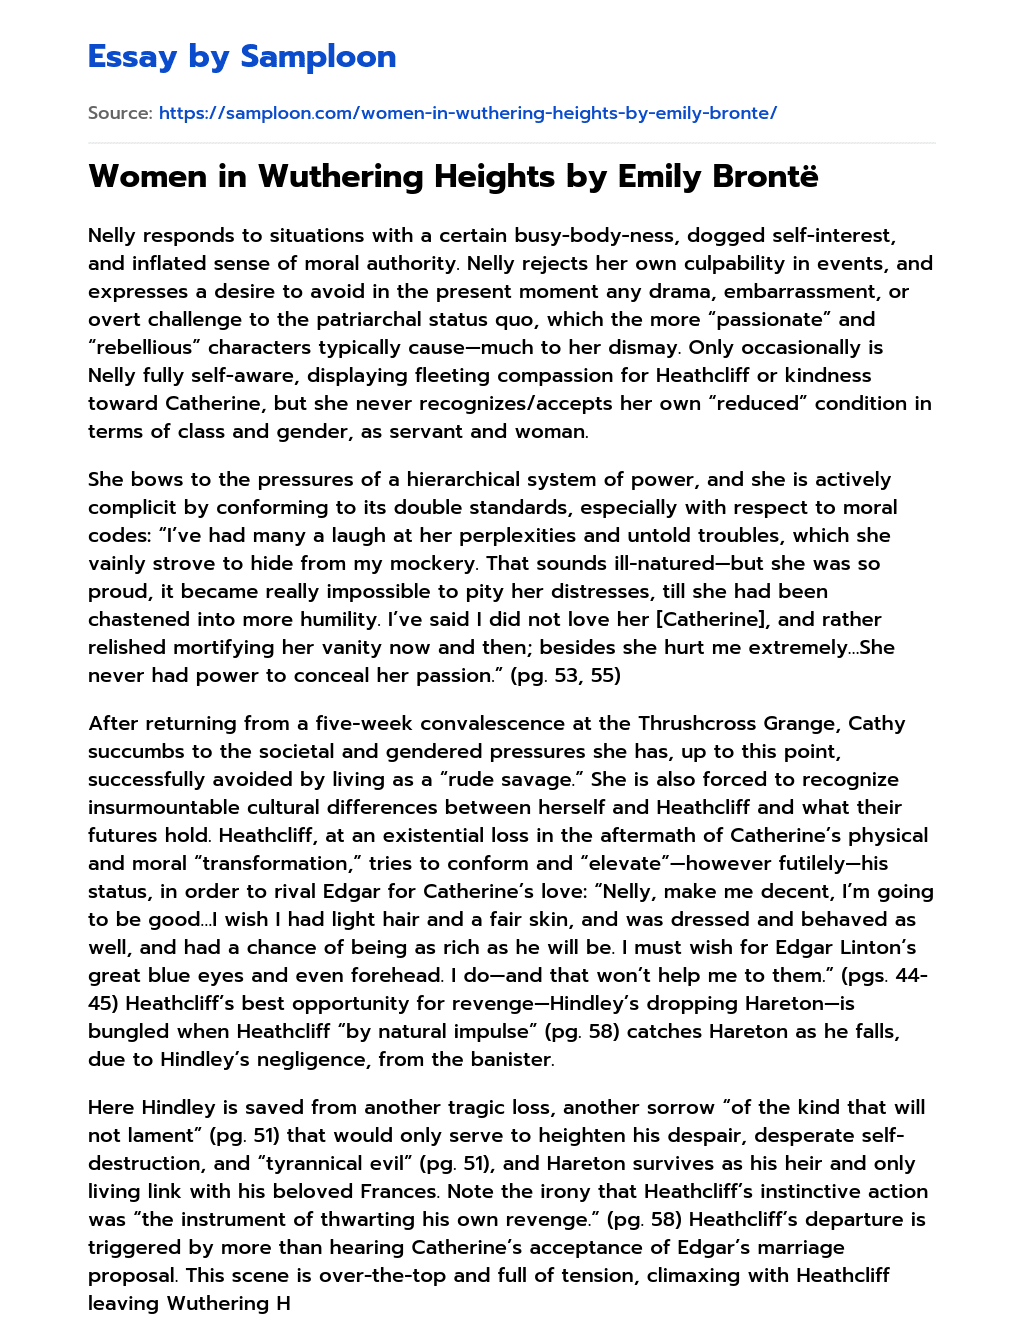 Women in Wuthering Heights by Emily Brontë essay